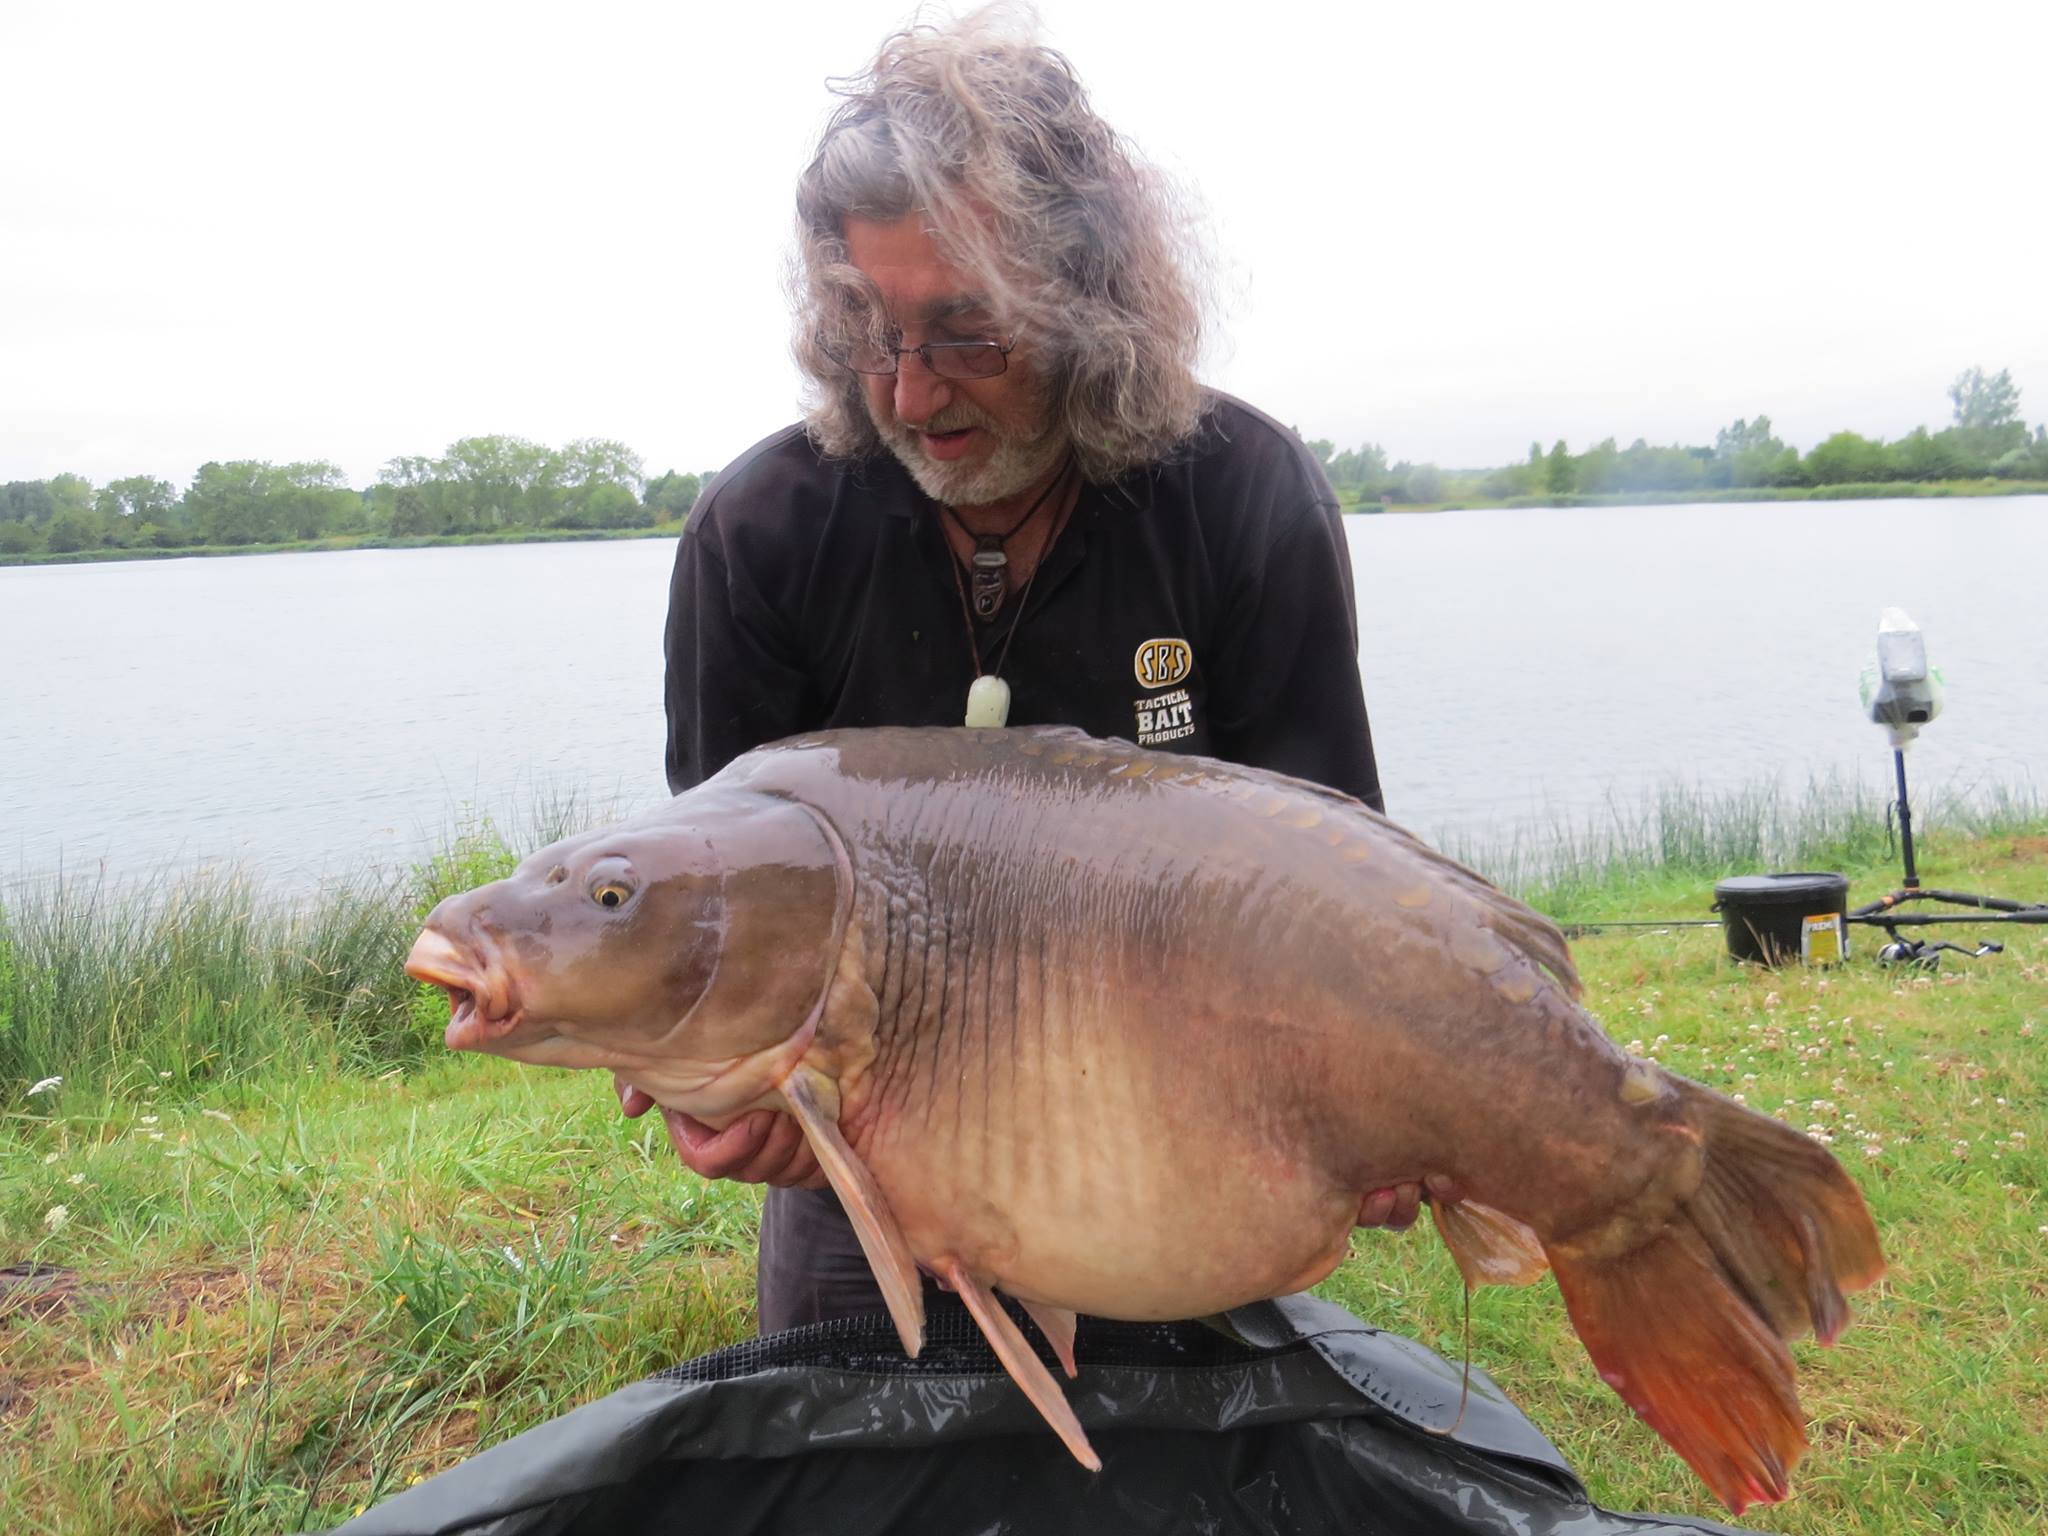 The greatest success, if we are catching nice carp but also taking care of them